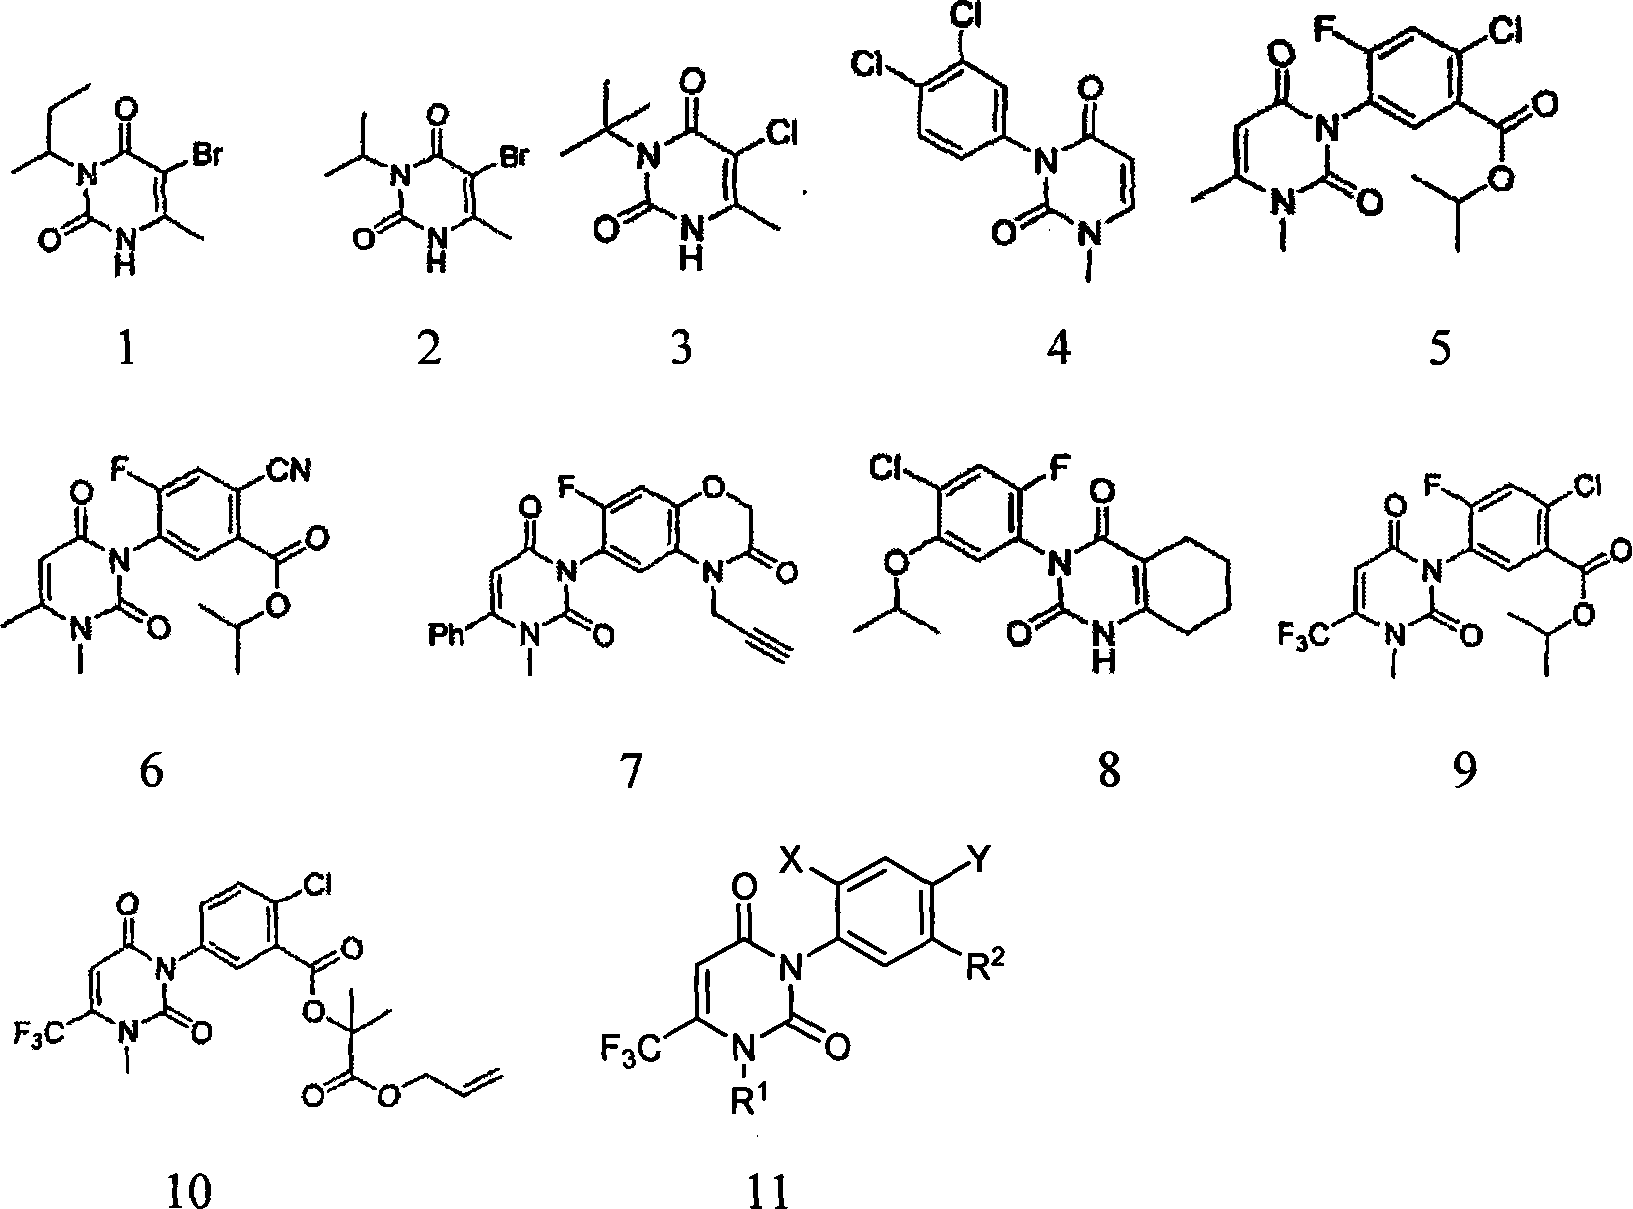 Uracil weeding compounds introducing amide structure